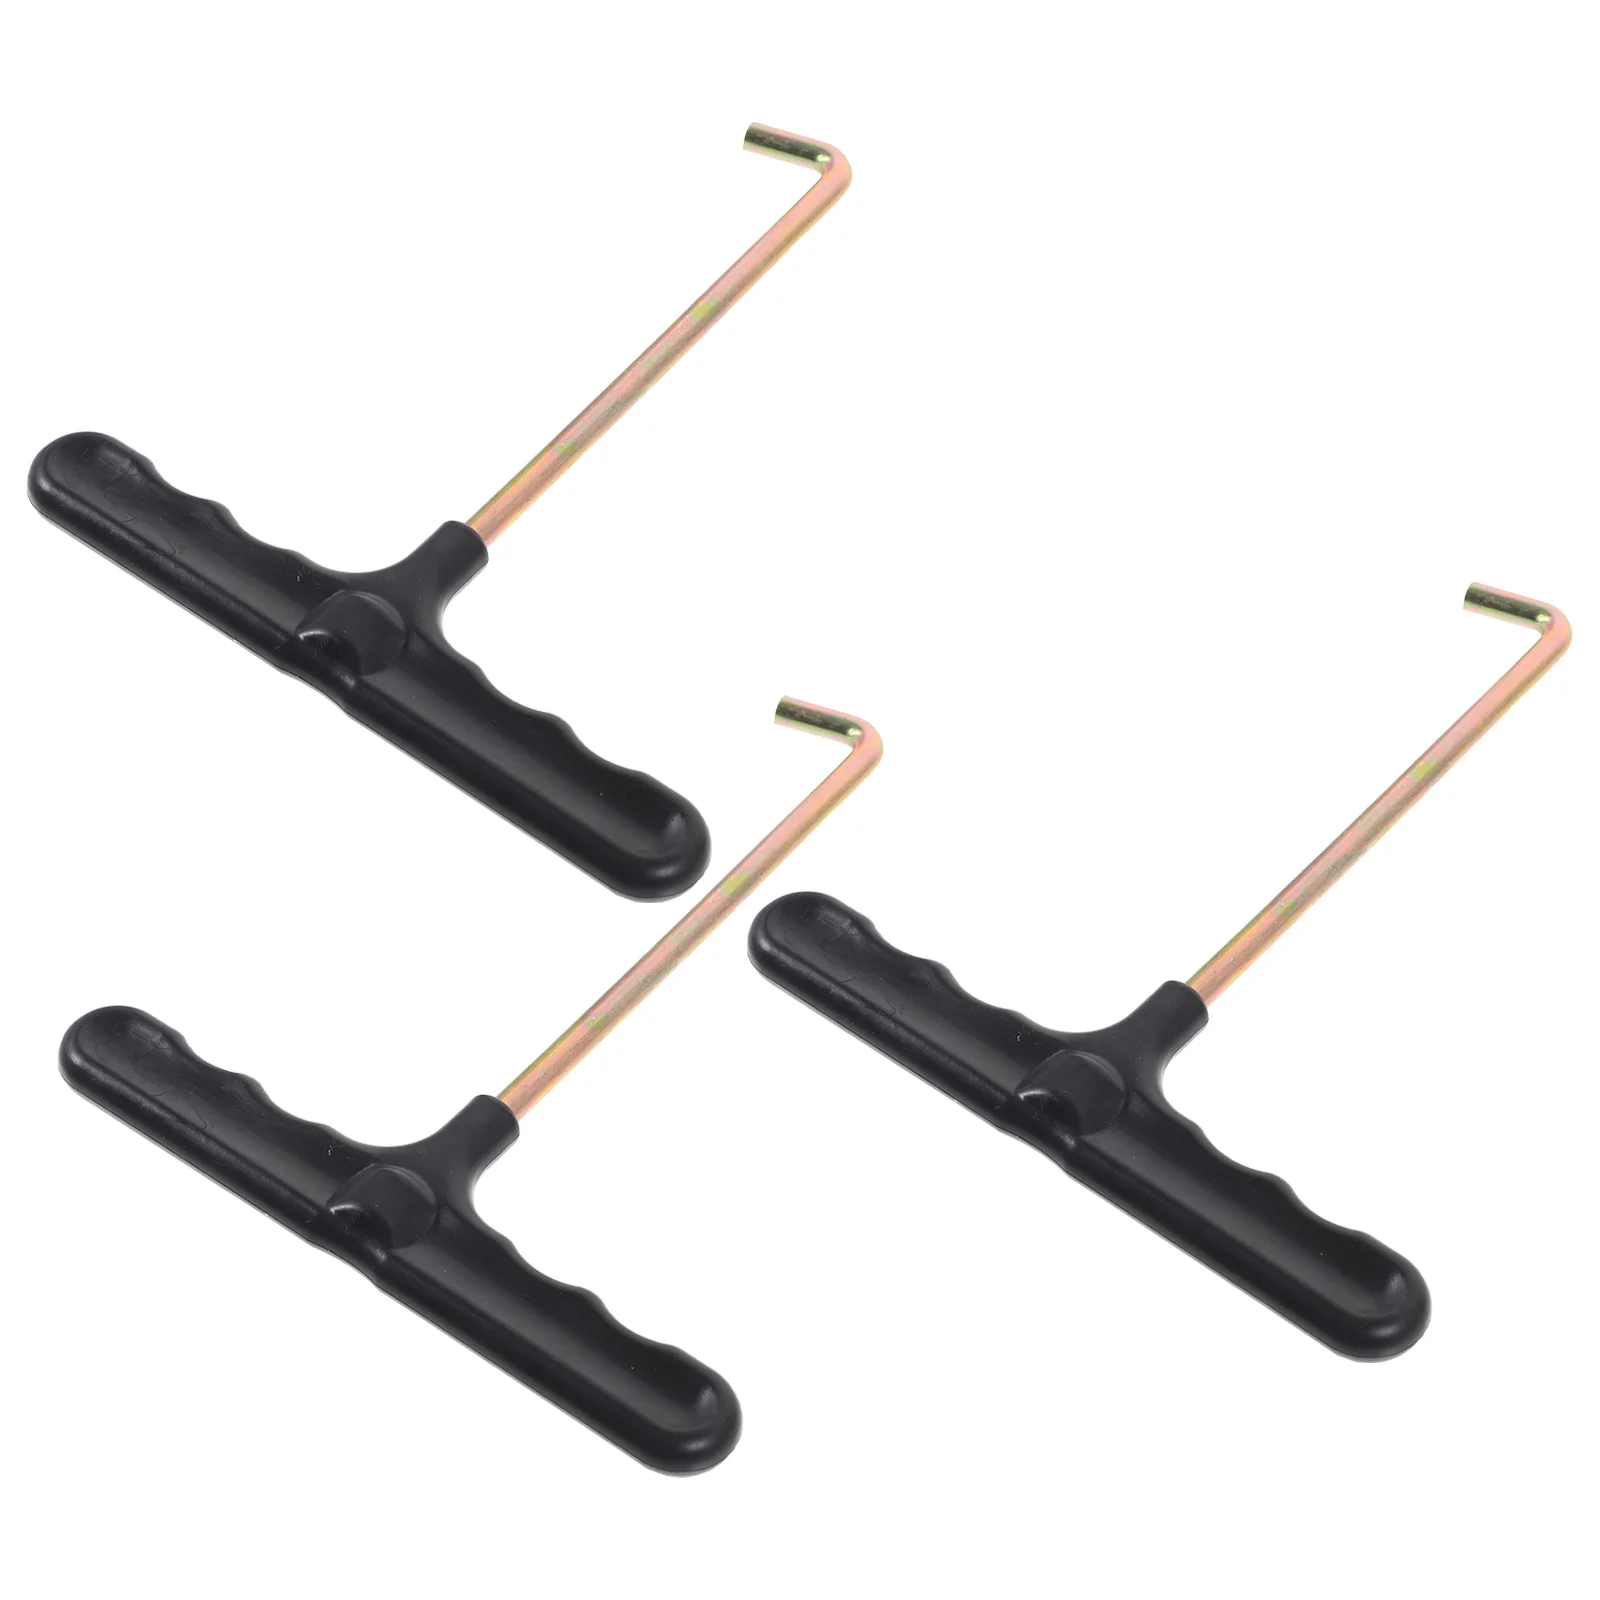 

3pcs Shoe Lace Tightening Tools Professional Shoelace Pullers Portable Shoe Lace Pullers